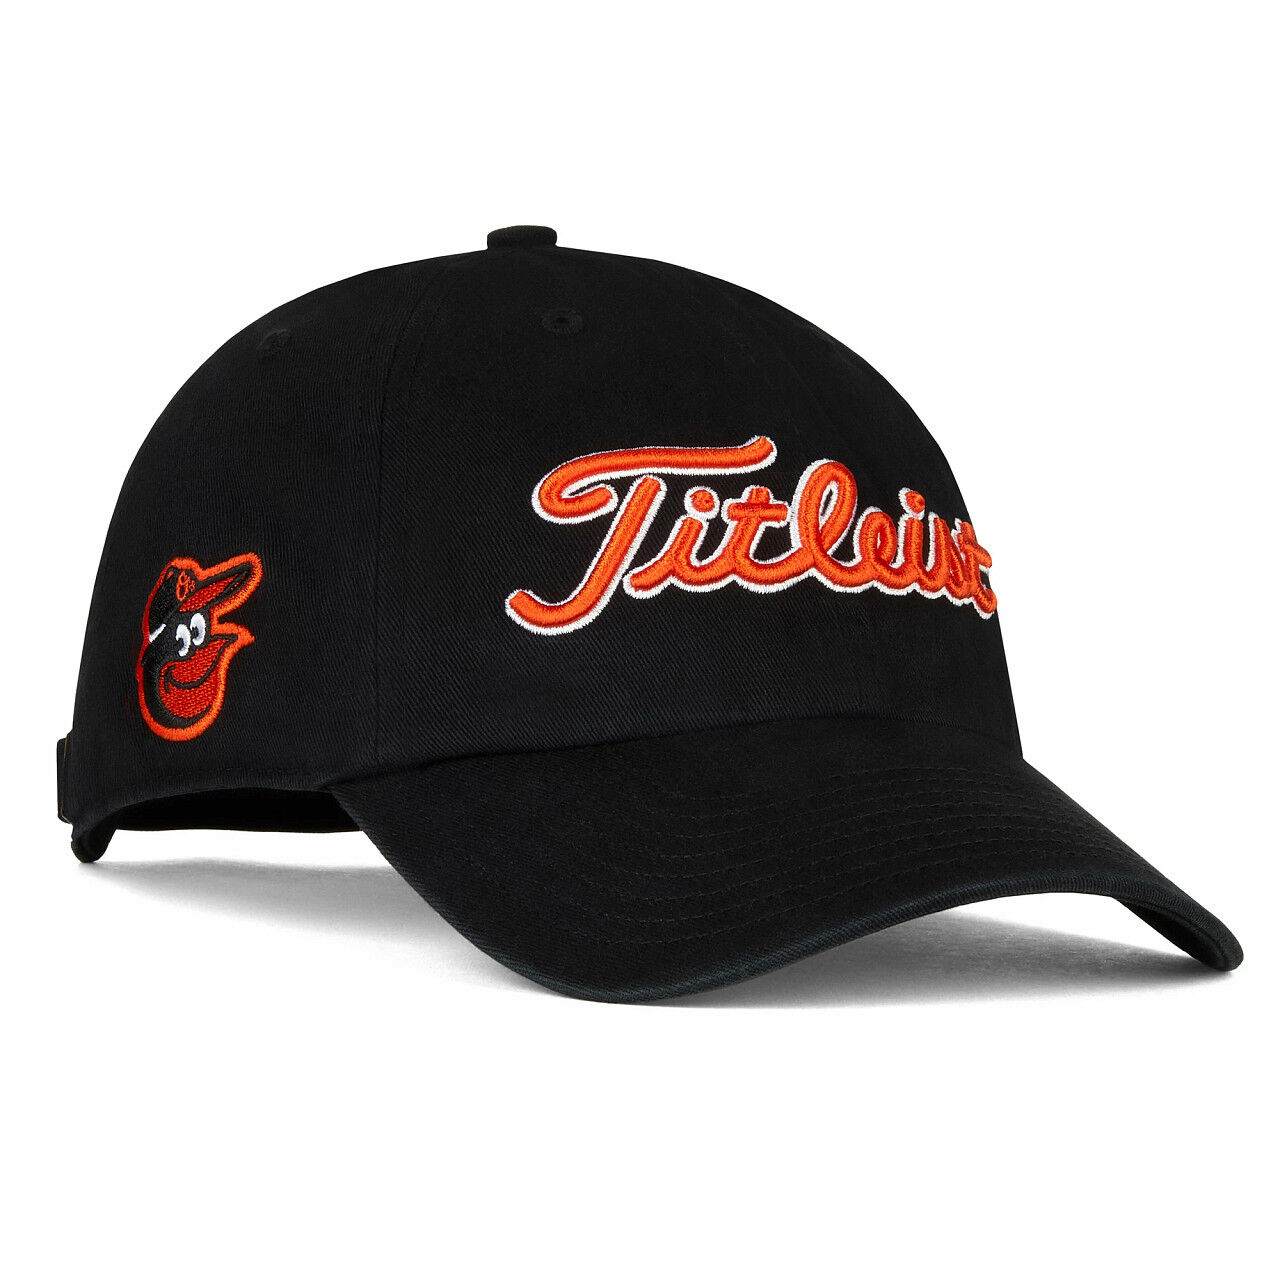 Popular MLB Clean Up Hat - Orioles | golf-sales.com only for you